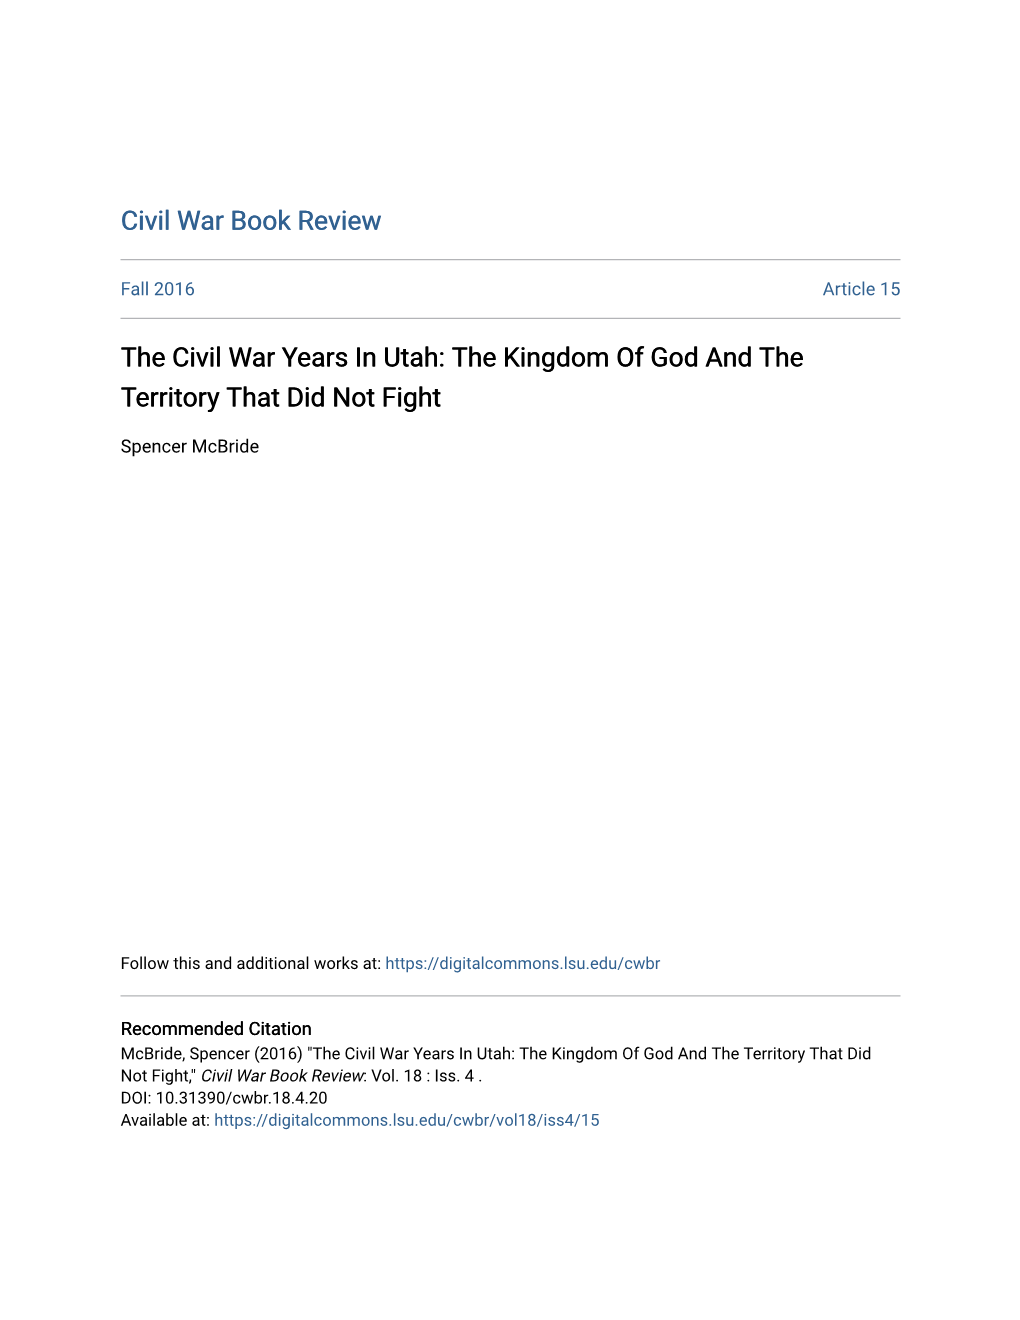 The Civil War Years in Utah: the Kingdom of God and the Territory That Did Not Fight